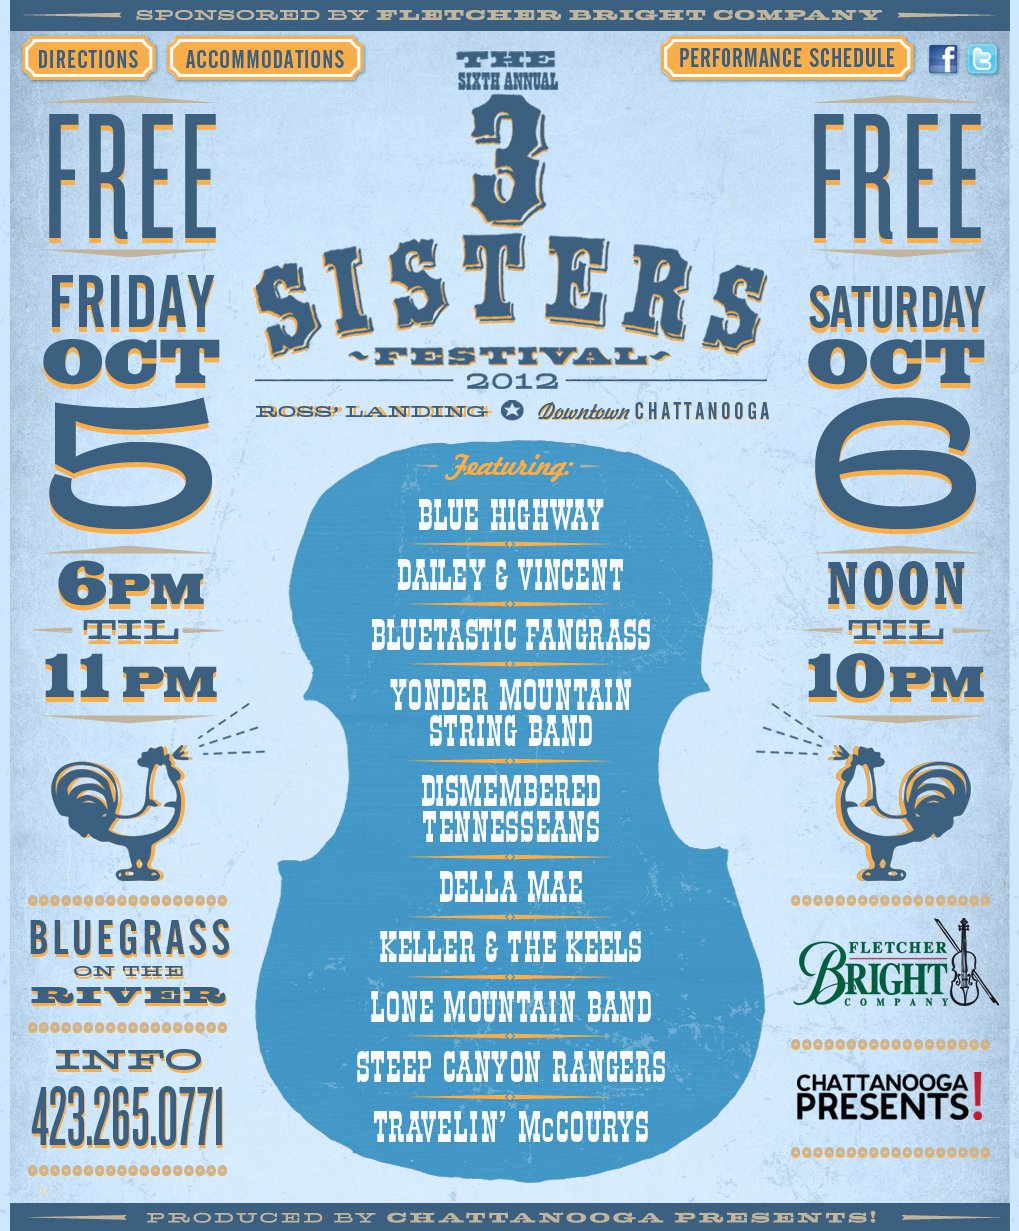 6th Annual 3 Sisters Bluegrass Festival The Pulse » Chattanooga's